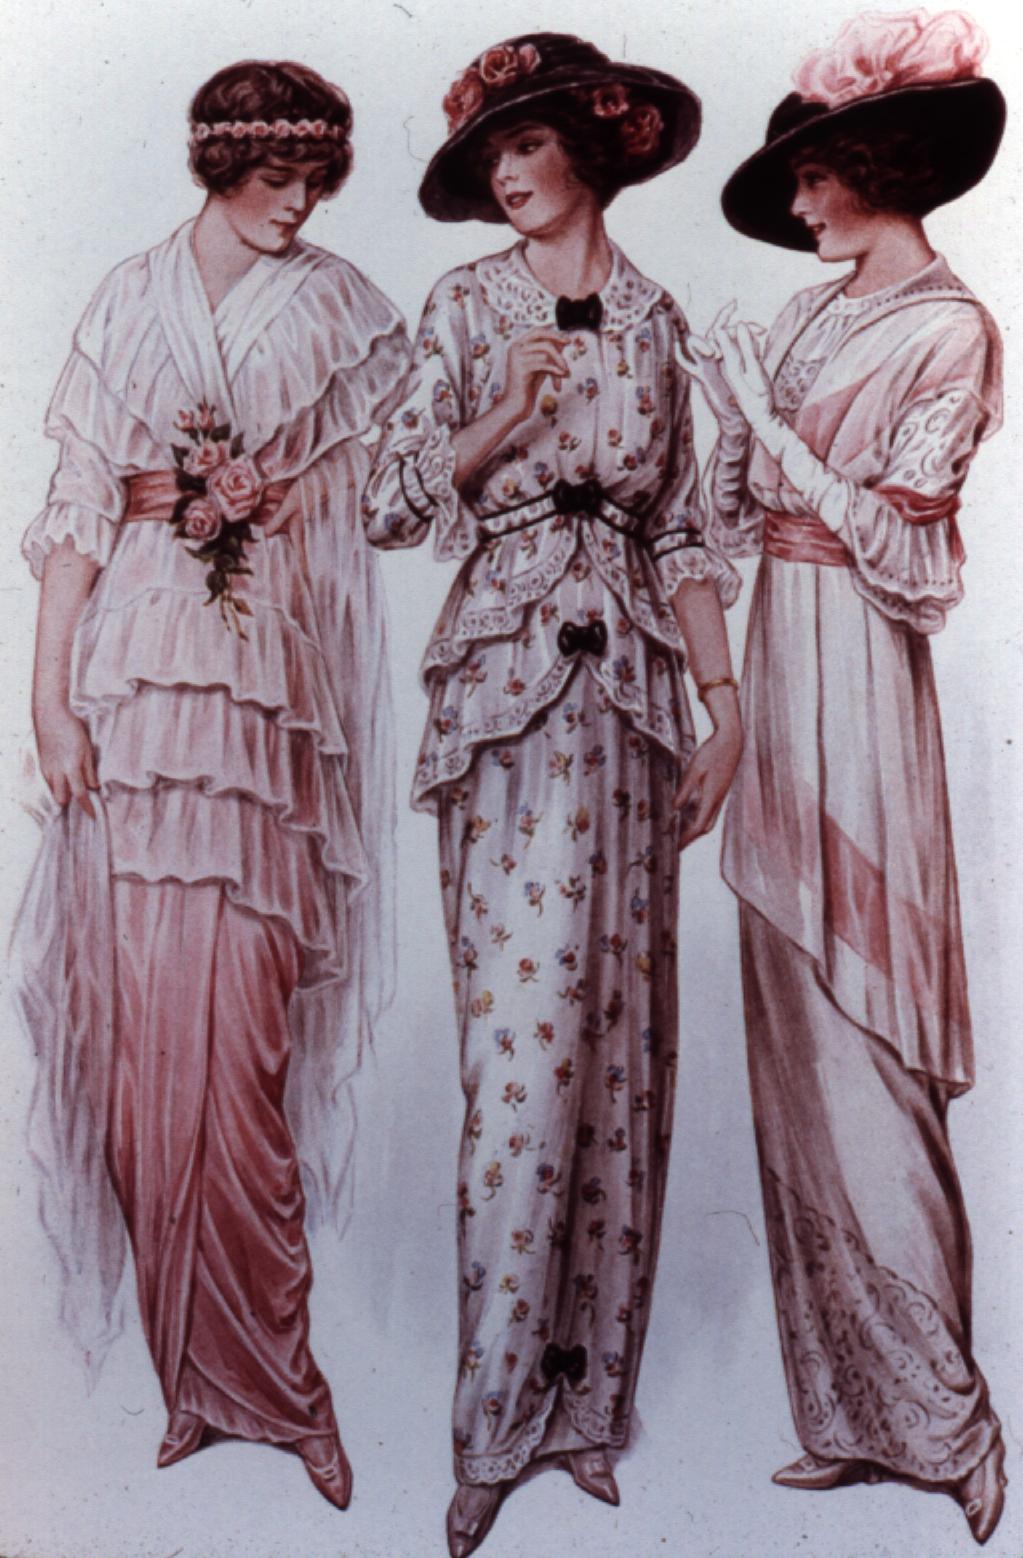 Fashion Through Time 1910s The beginning of women's independence